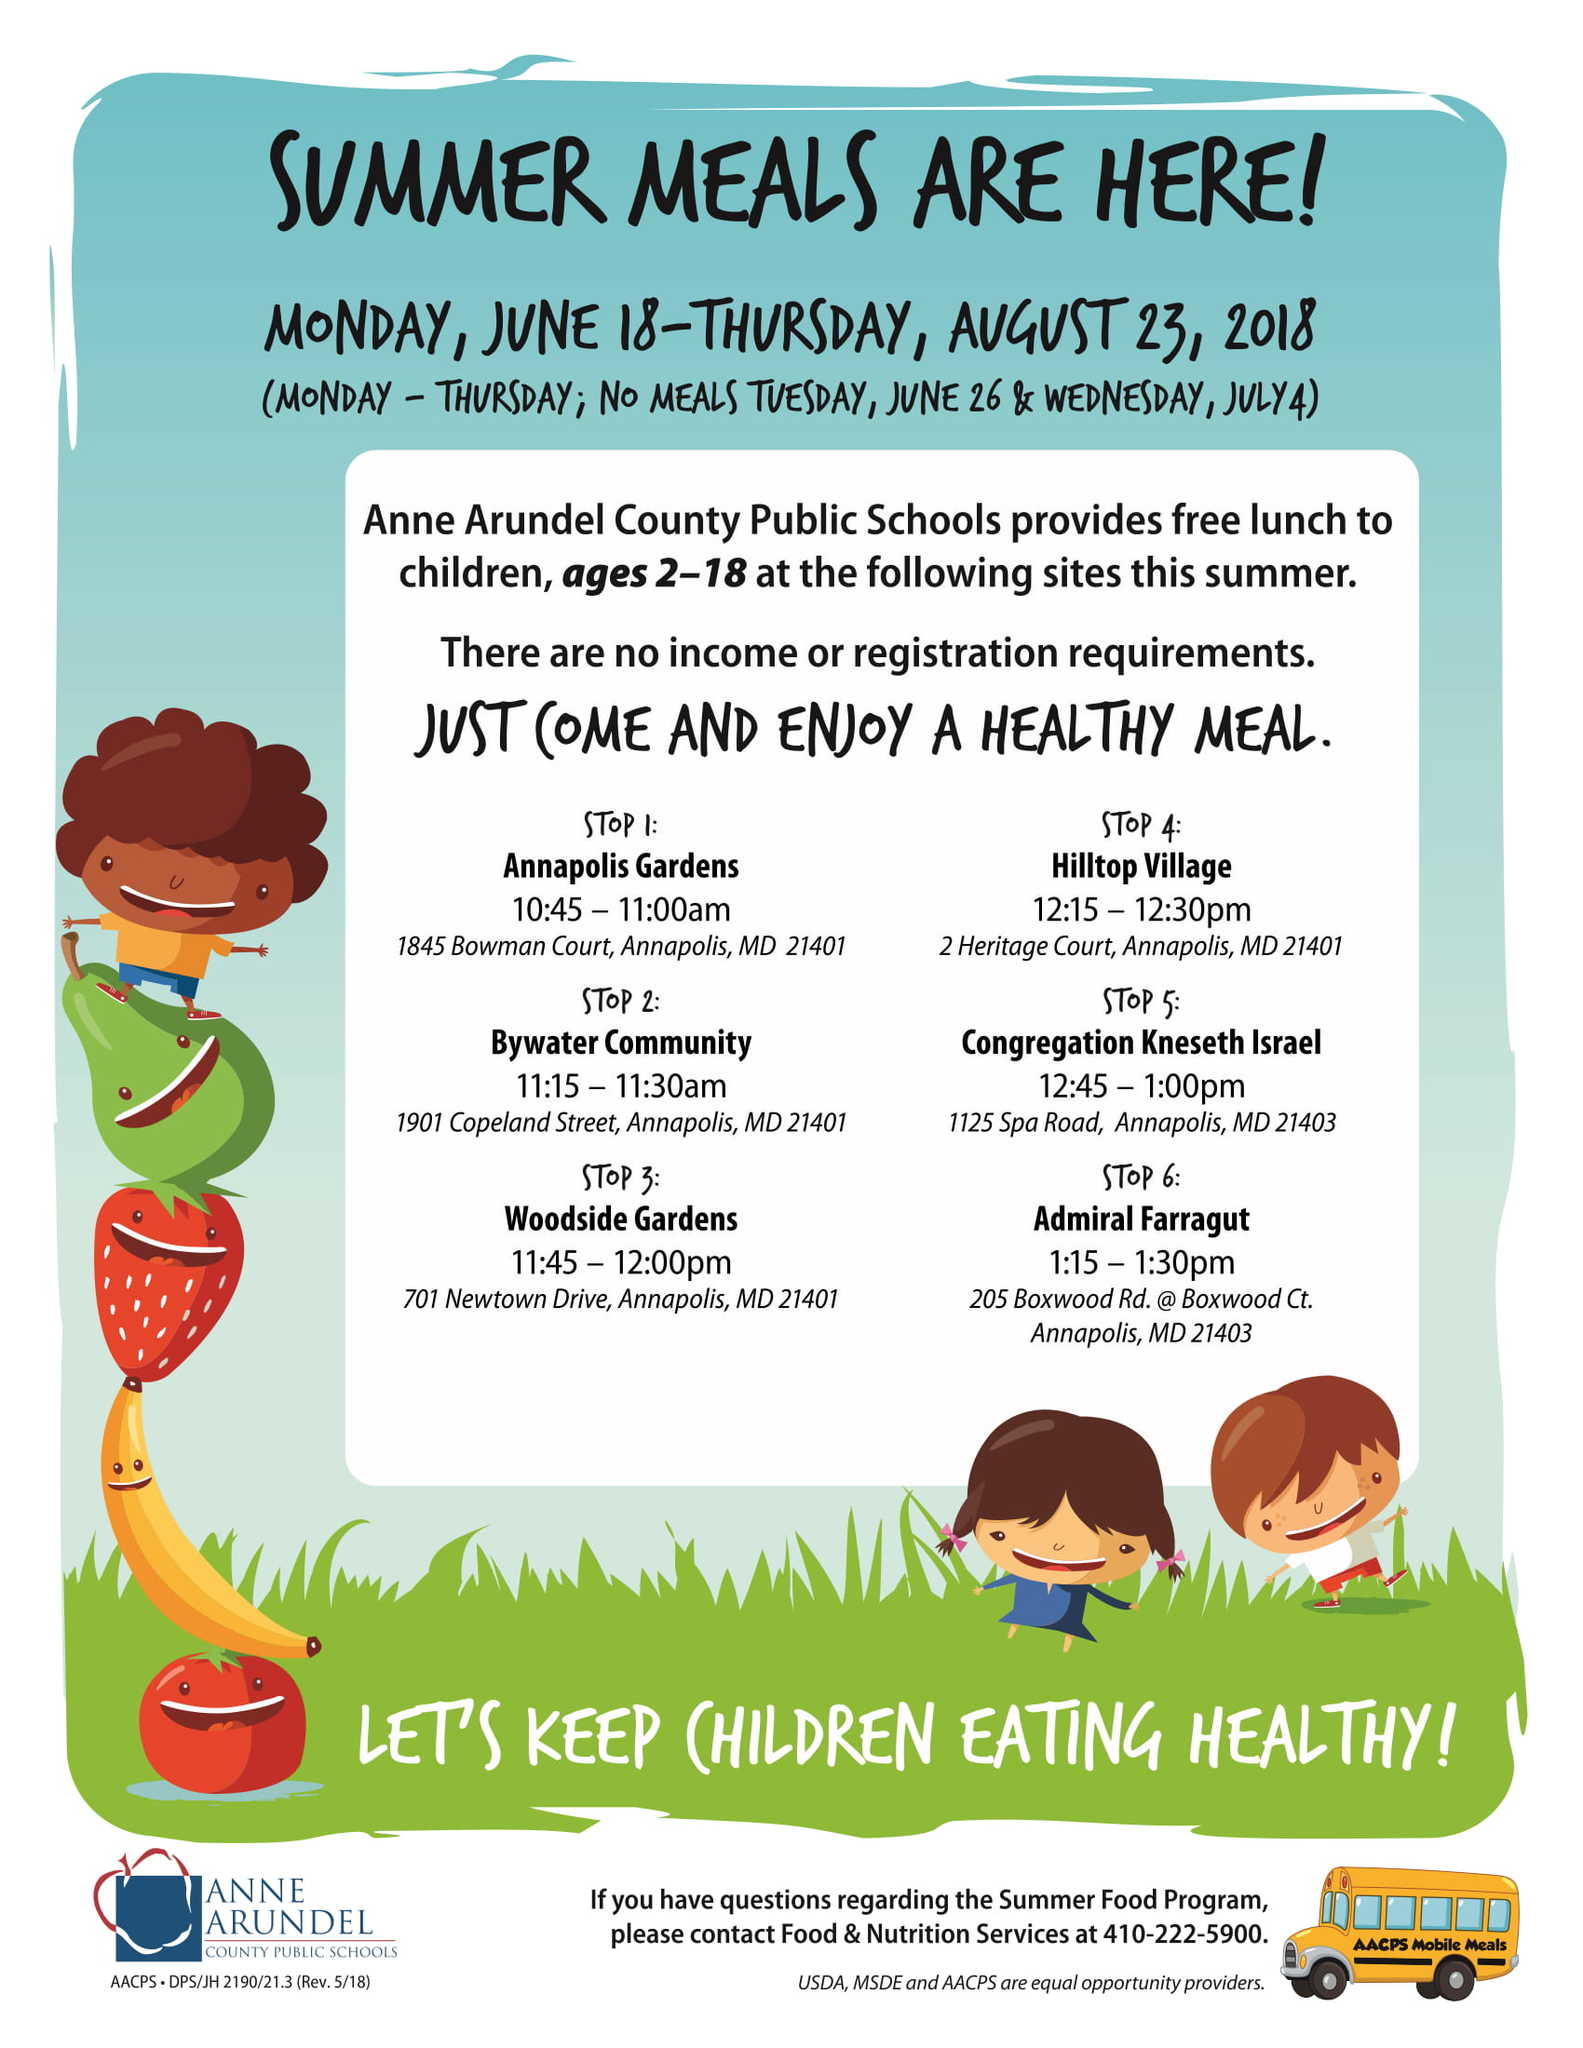 AACPS Summer Meals Annapolis June 18 to August 23 2018 1 1